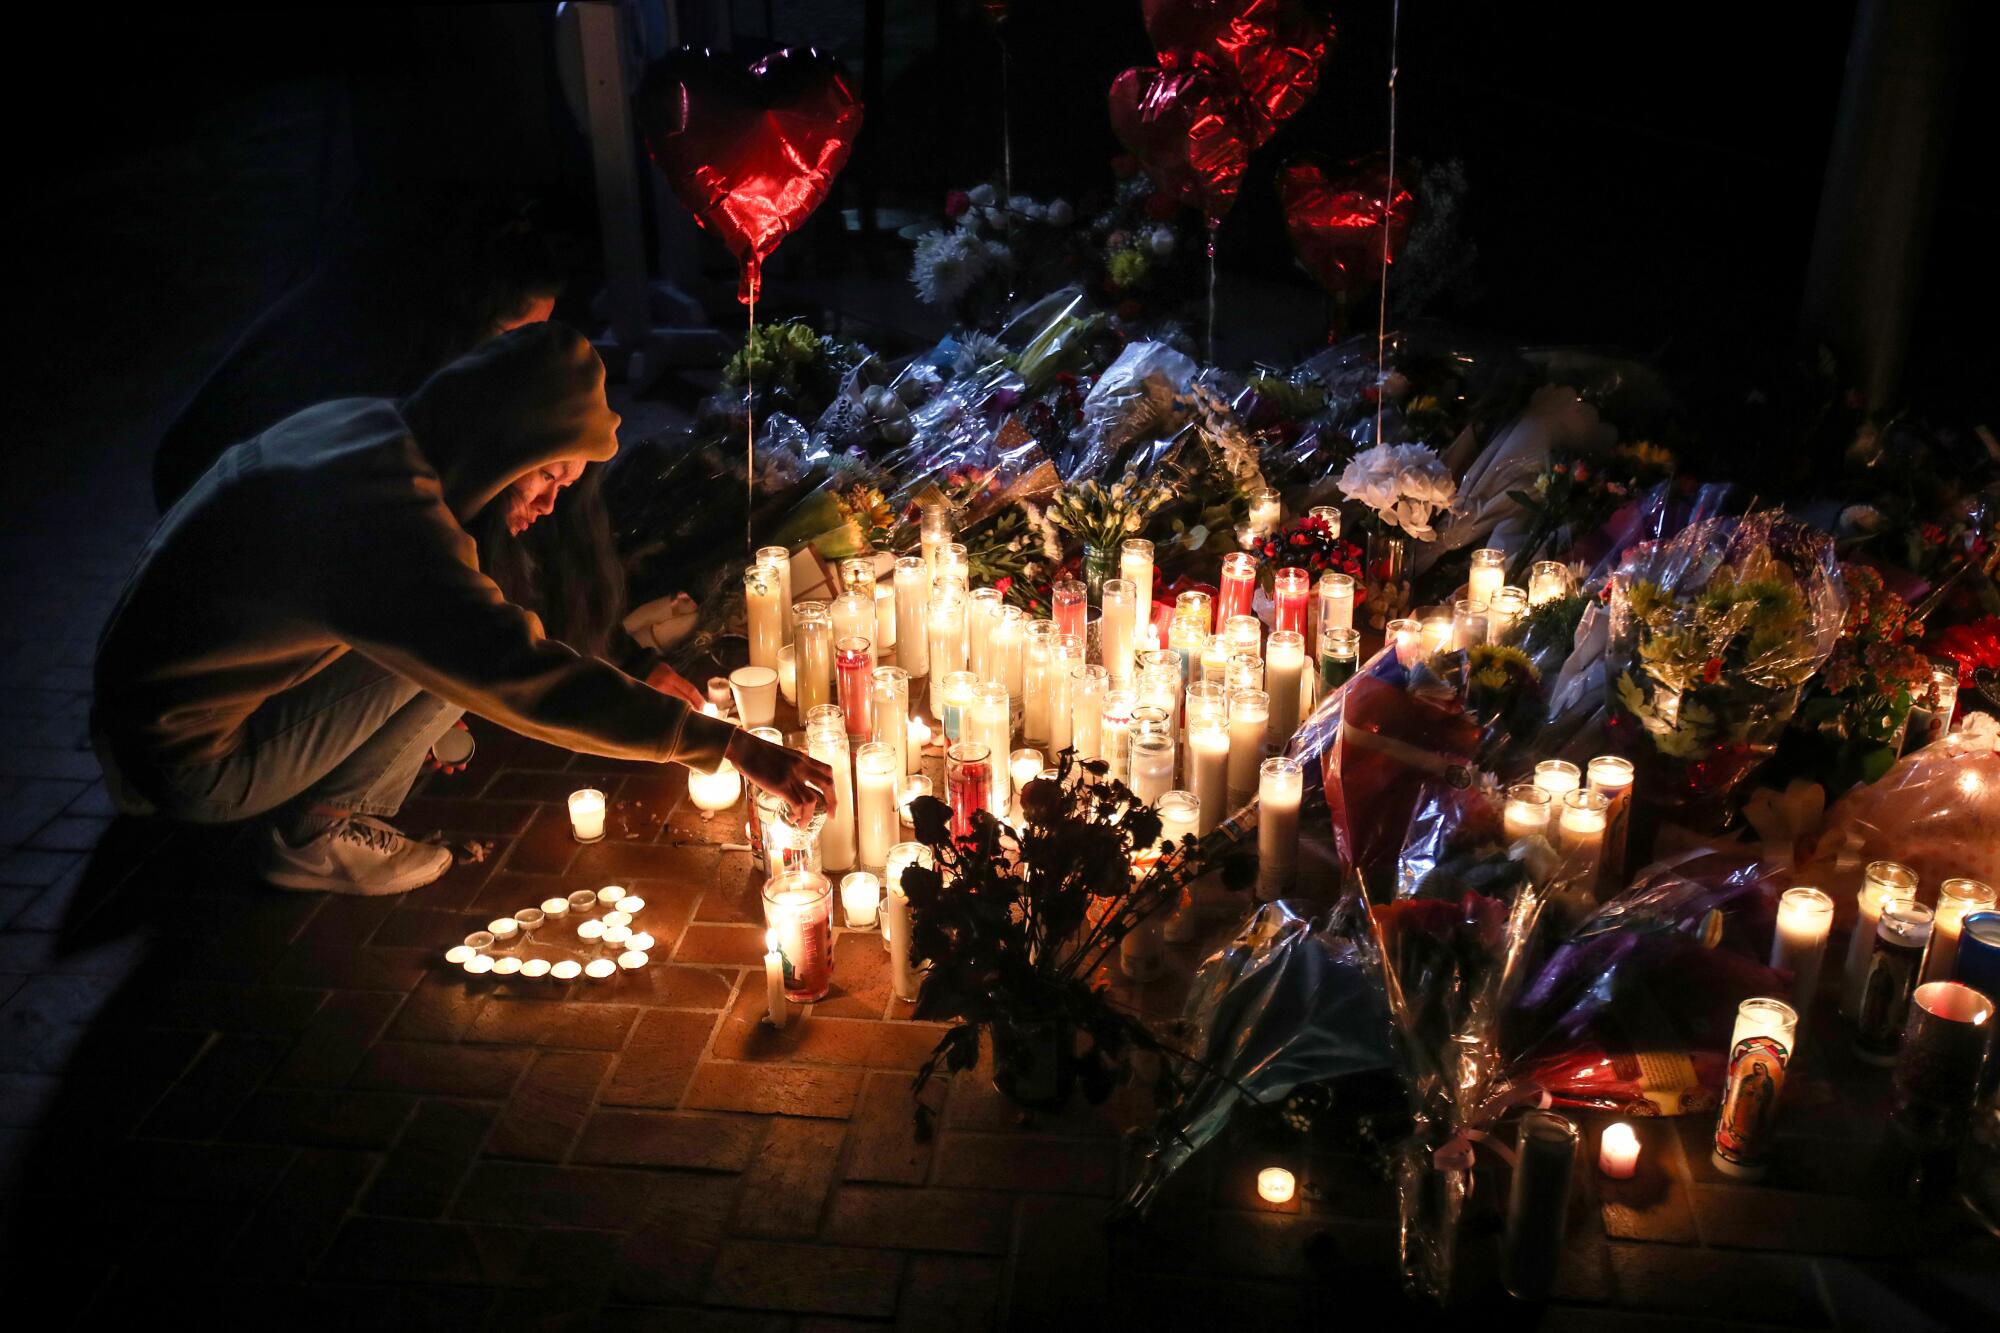 On Monday evening mourners took part in a vigil for victims of the Monterey Park mass shooting at Star Ballroom 